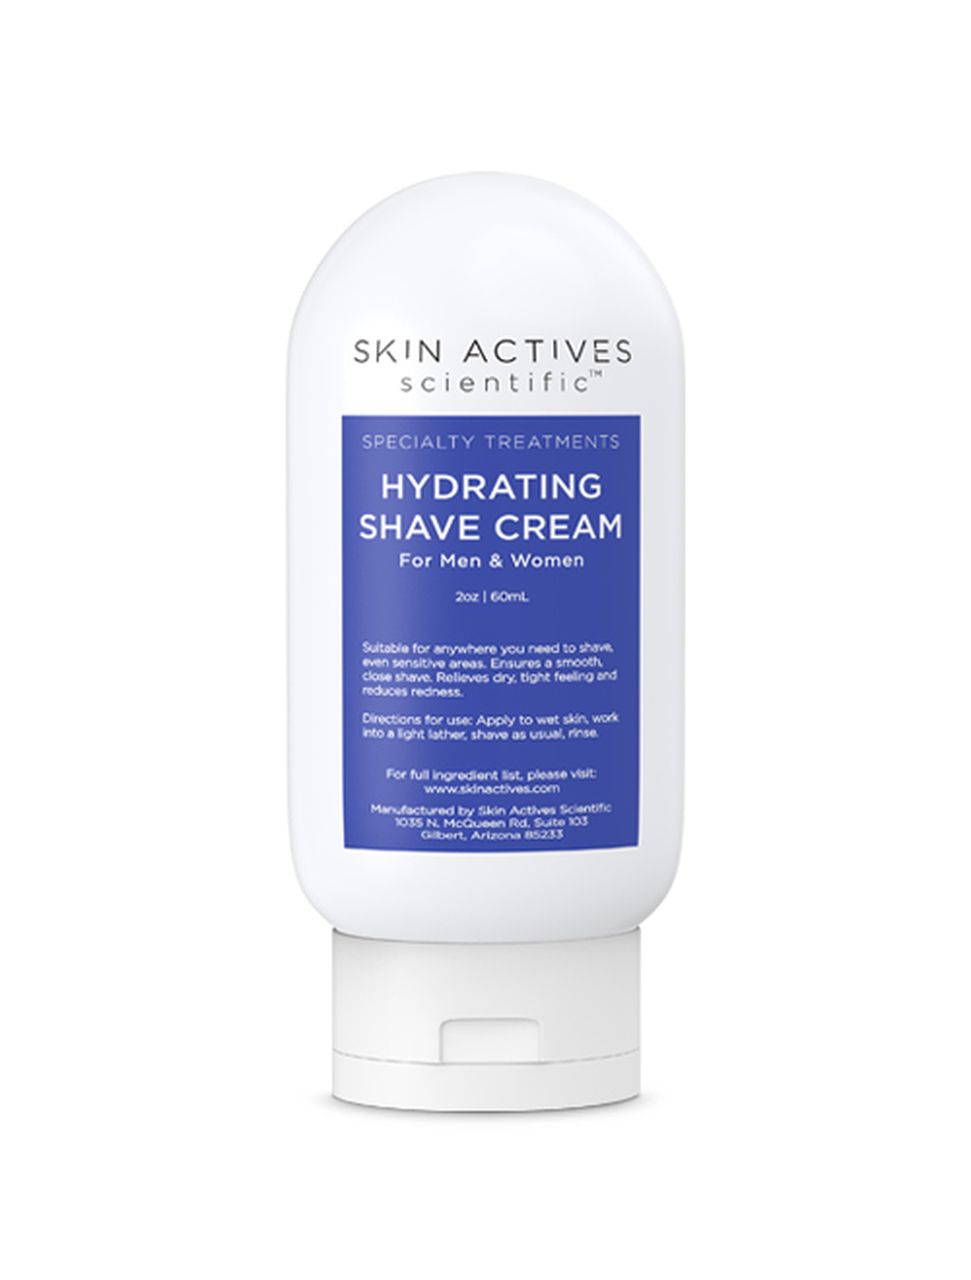 Shave Cream - Soothing & Hydrating - Skin Actives - 2.0 oz.